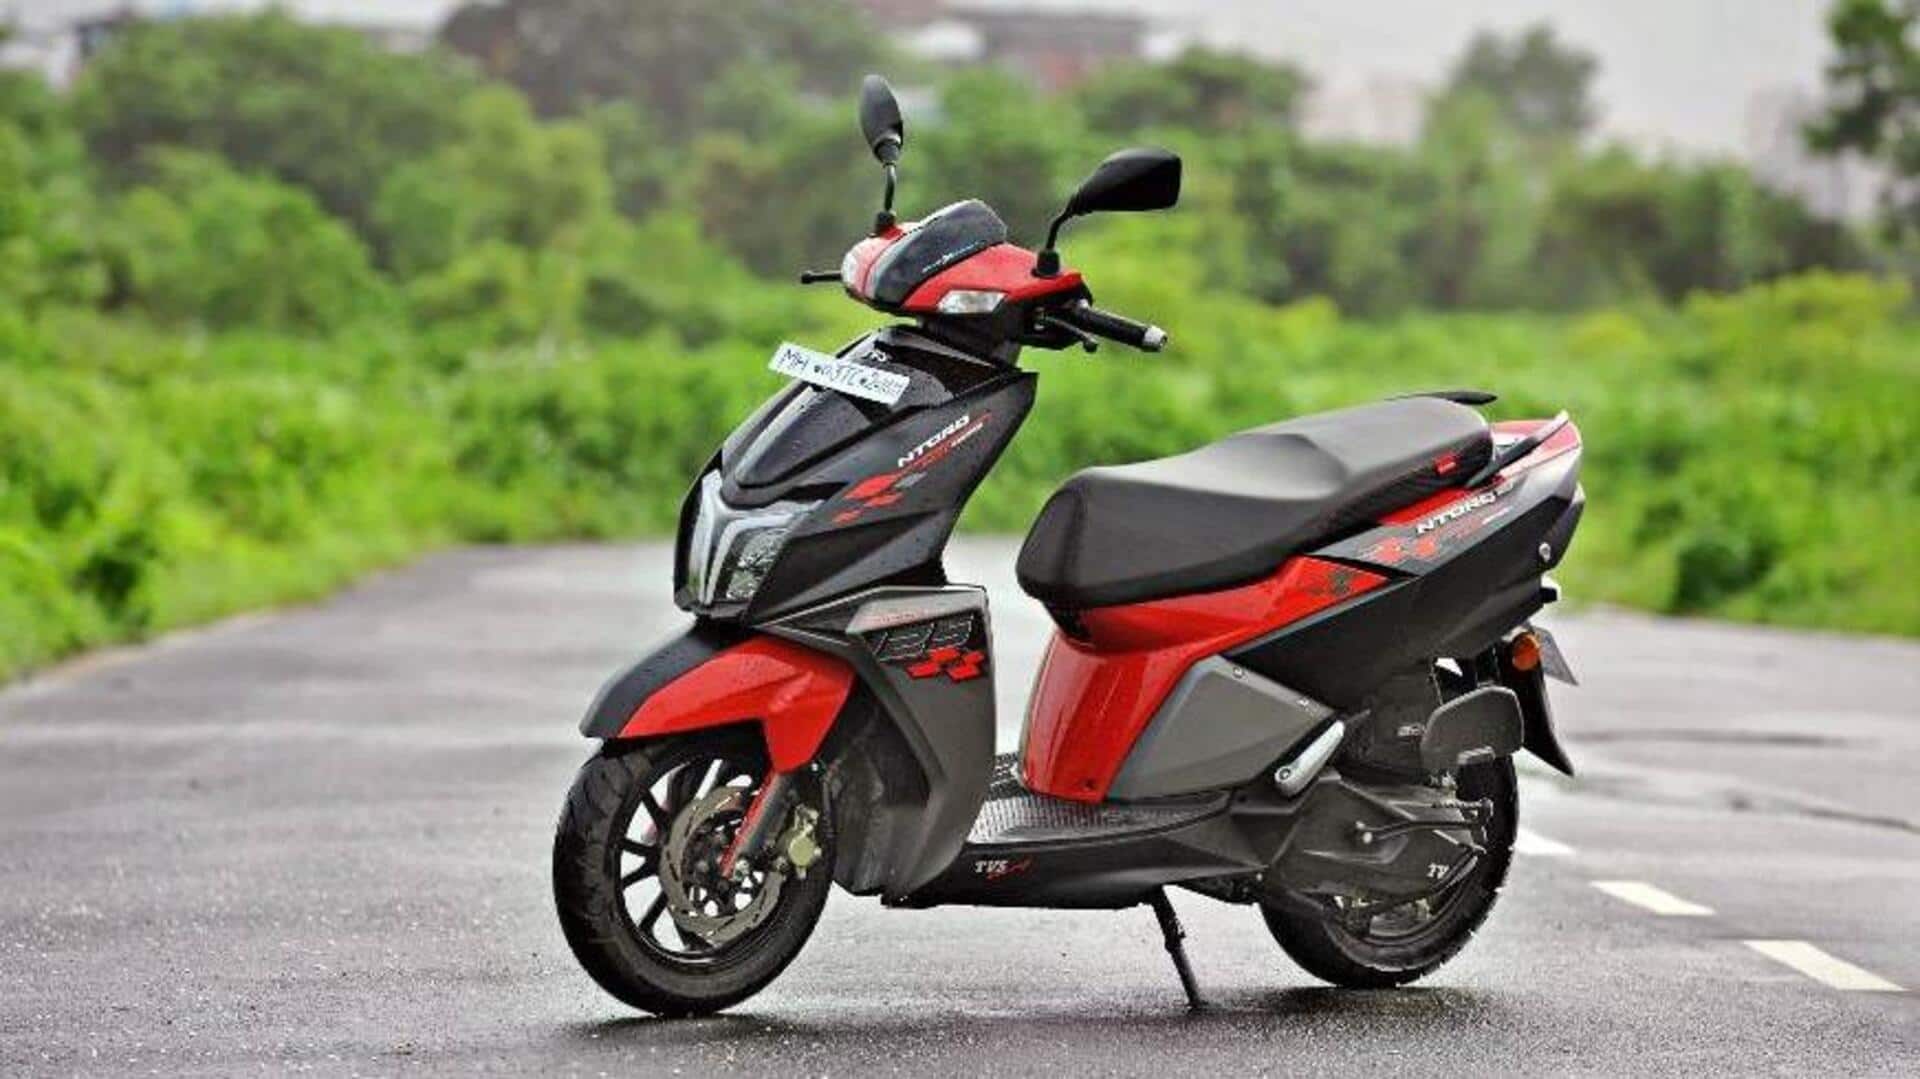 First-time buyers, rural demand to drive two-wheeler sales in India